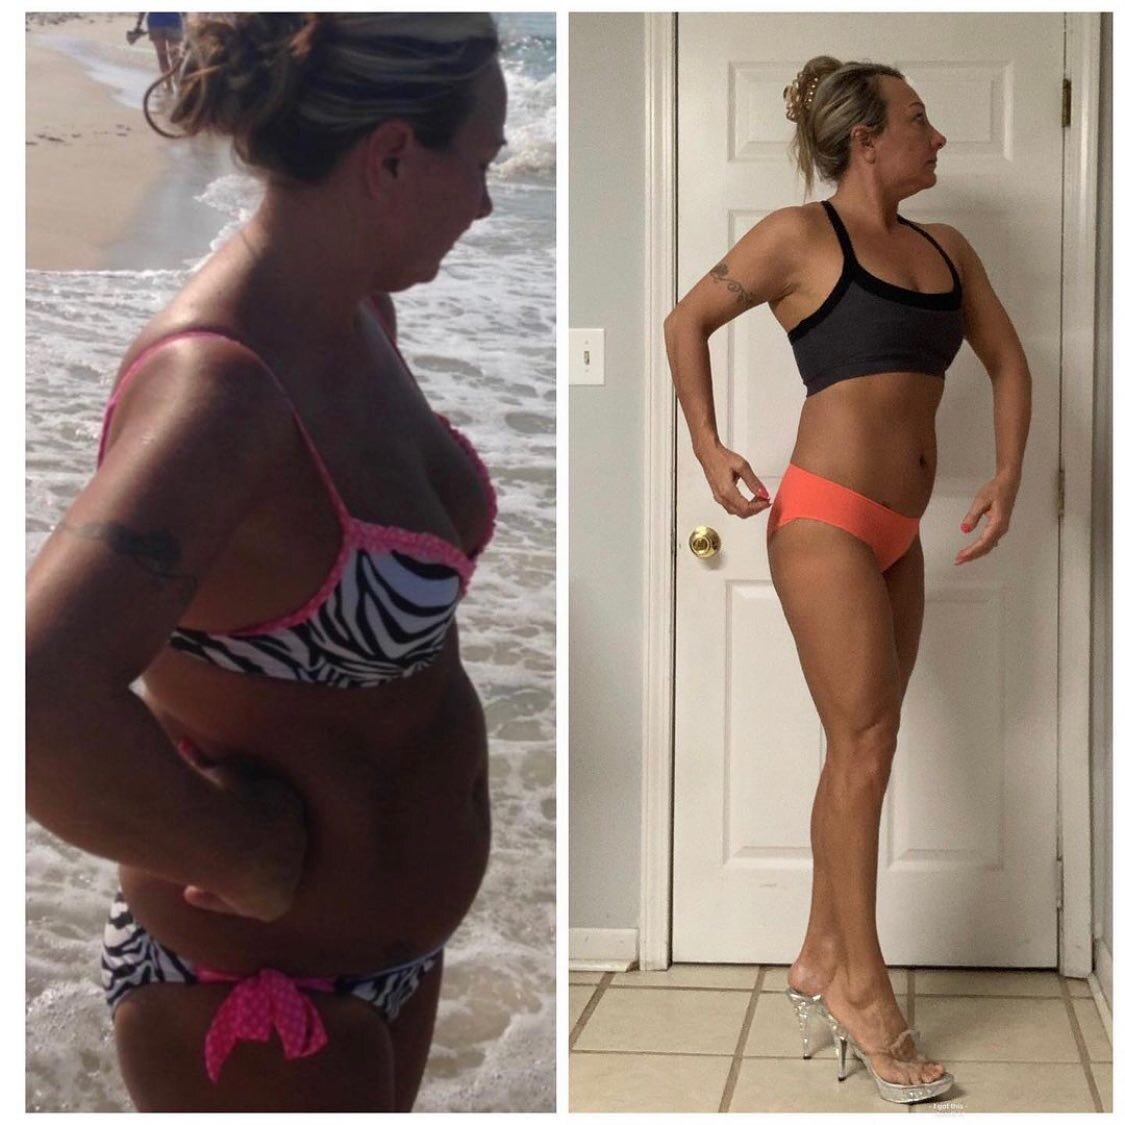 Talk about a Transformation 😎
- 
@jessicawhitworth is 17 weeks out from her next figure competition and she is PUTTING IN THE WORK 💪💪💪
Excited for the progress she has made and for the physique she is going to bring to the stage this summer!
Nutr